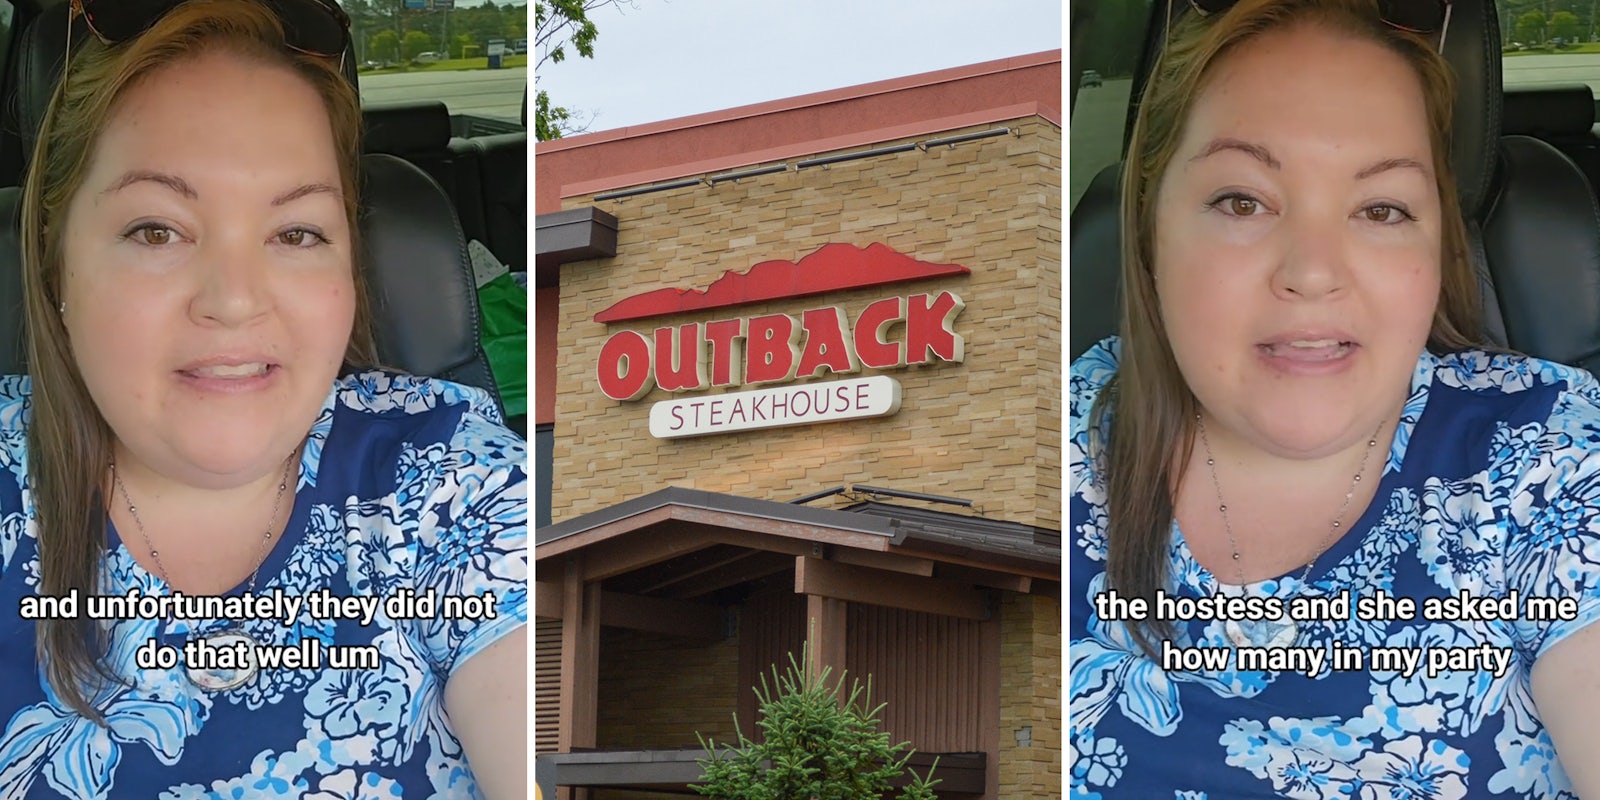 Outback Steakhouse manager catches ‘attitude’ with customer eating alone. He doesn’t realize she’s a secret shopper